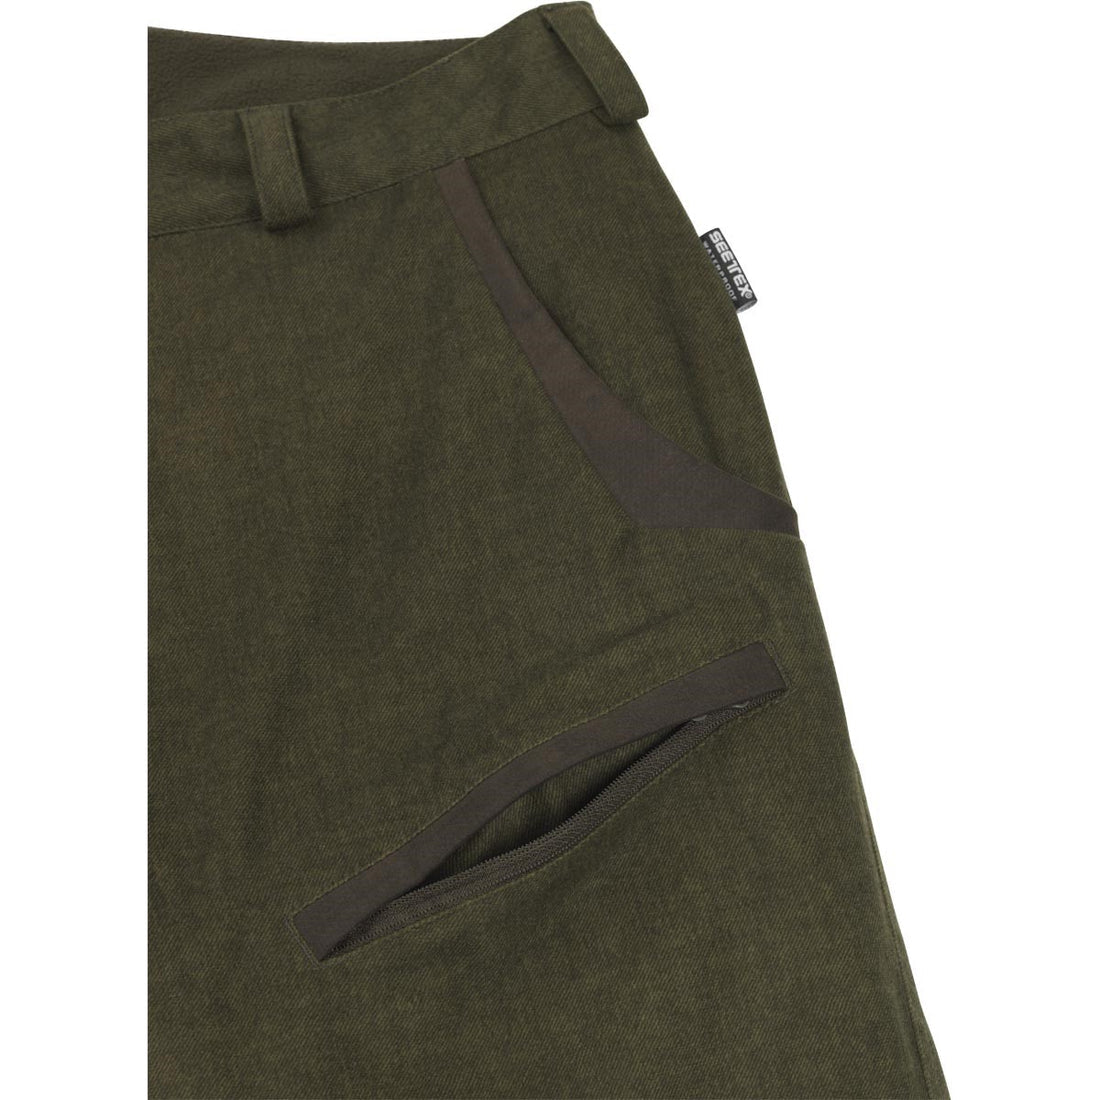 Seeland Womens North Lady Trousers